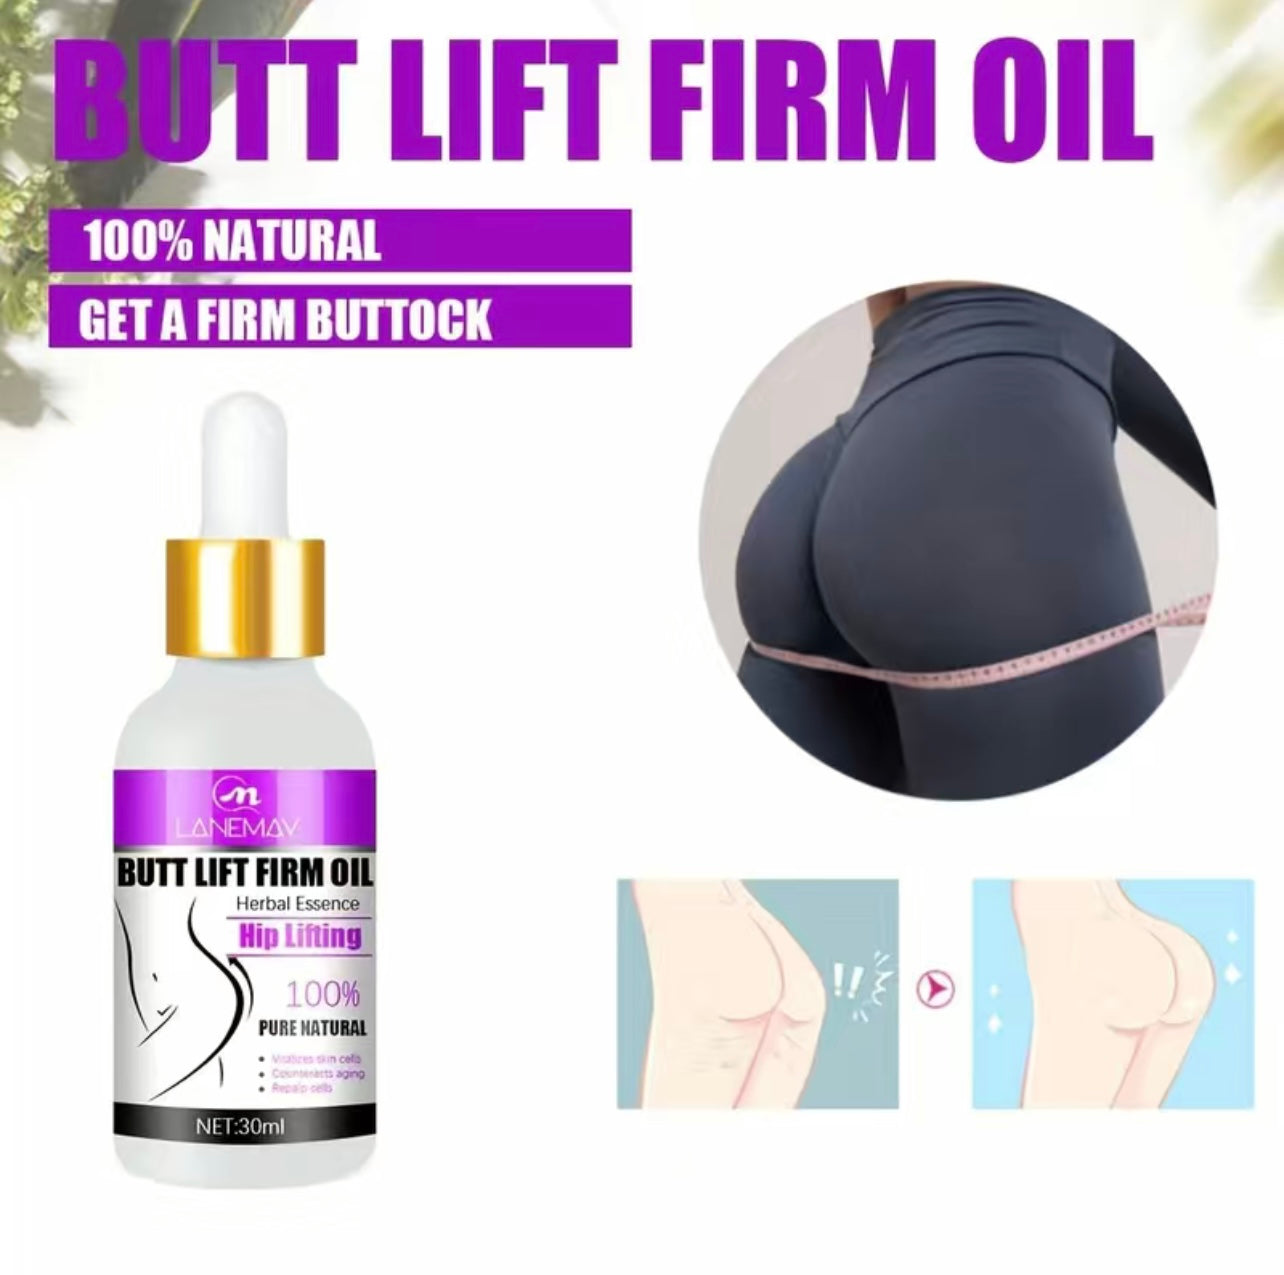 All Natural Butt Lifting, Firming and Plumping Body Oil.  some benefits of the product are cellulite smoothing, increased skin elasticity, and skin firming. The product also stimulates collagen production for a firmer, fuller buttocks. This Product can produce up to a 20% volume increase in the buttocks and hips with extended use. TikTok Viral Best Selling Item 